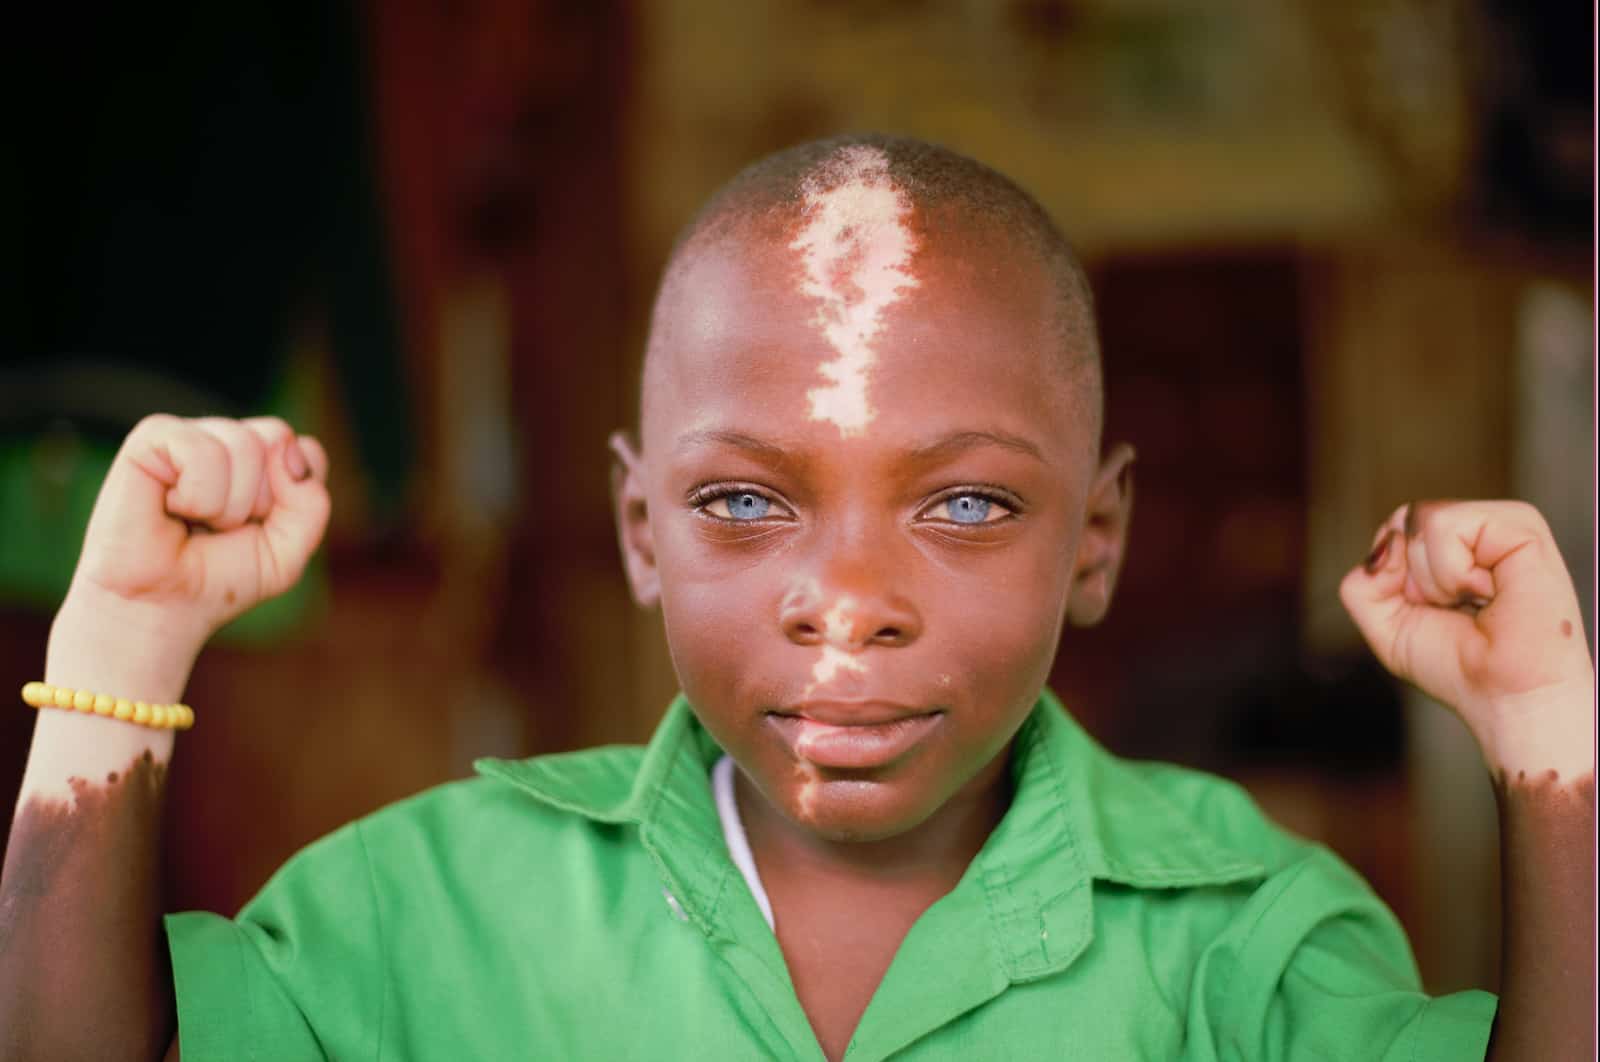 Waardenburg Syndrome picture: A boy with blue eyes and partial albinism, holding his arms up to show he is strong.